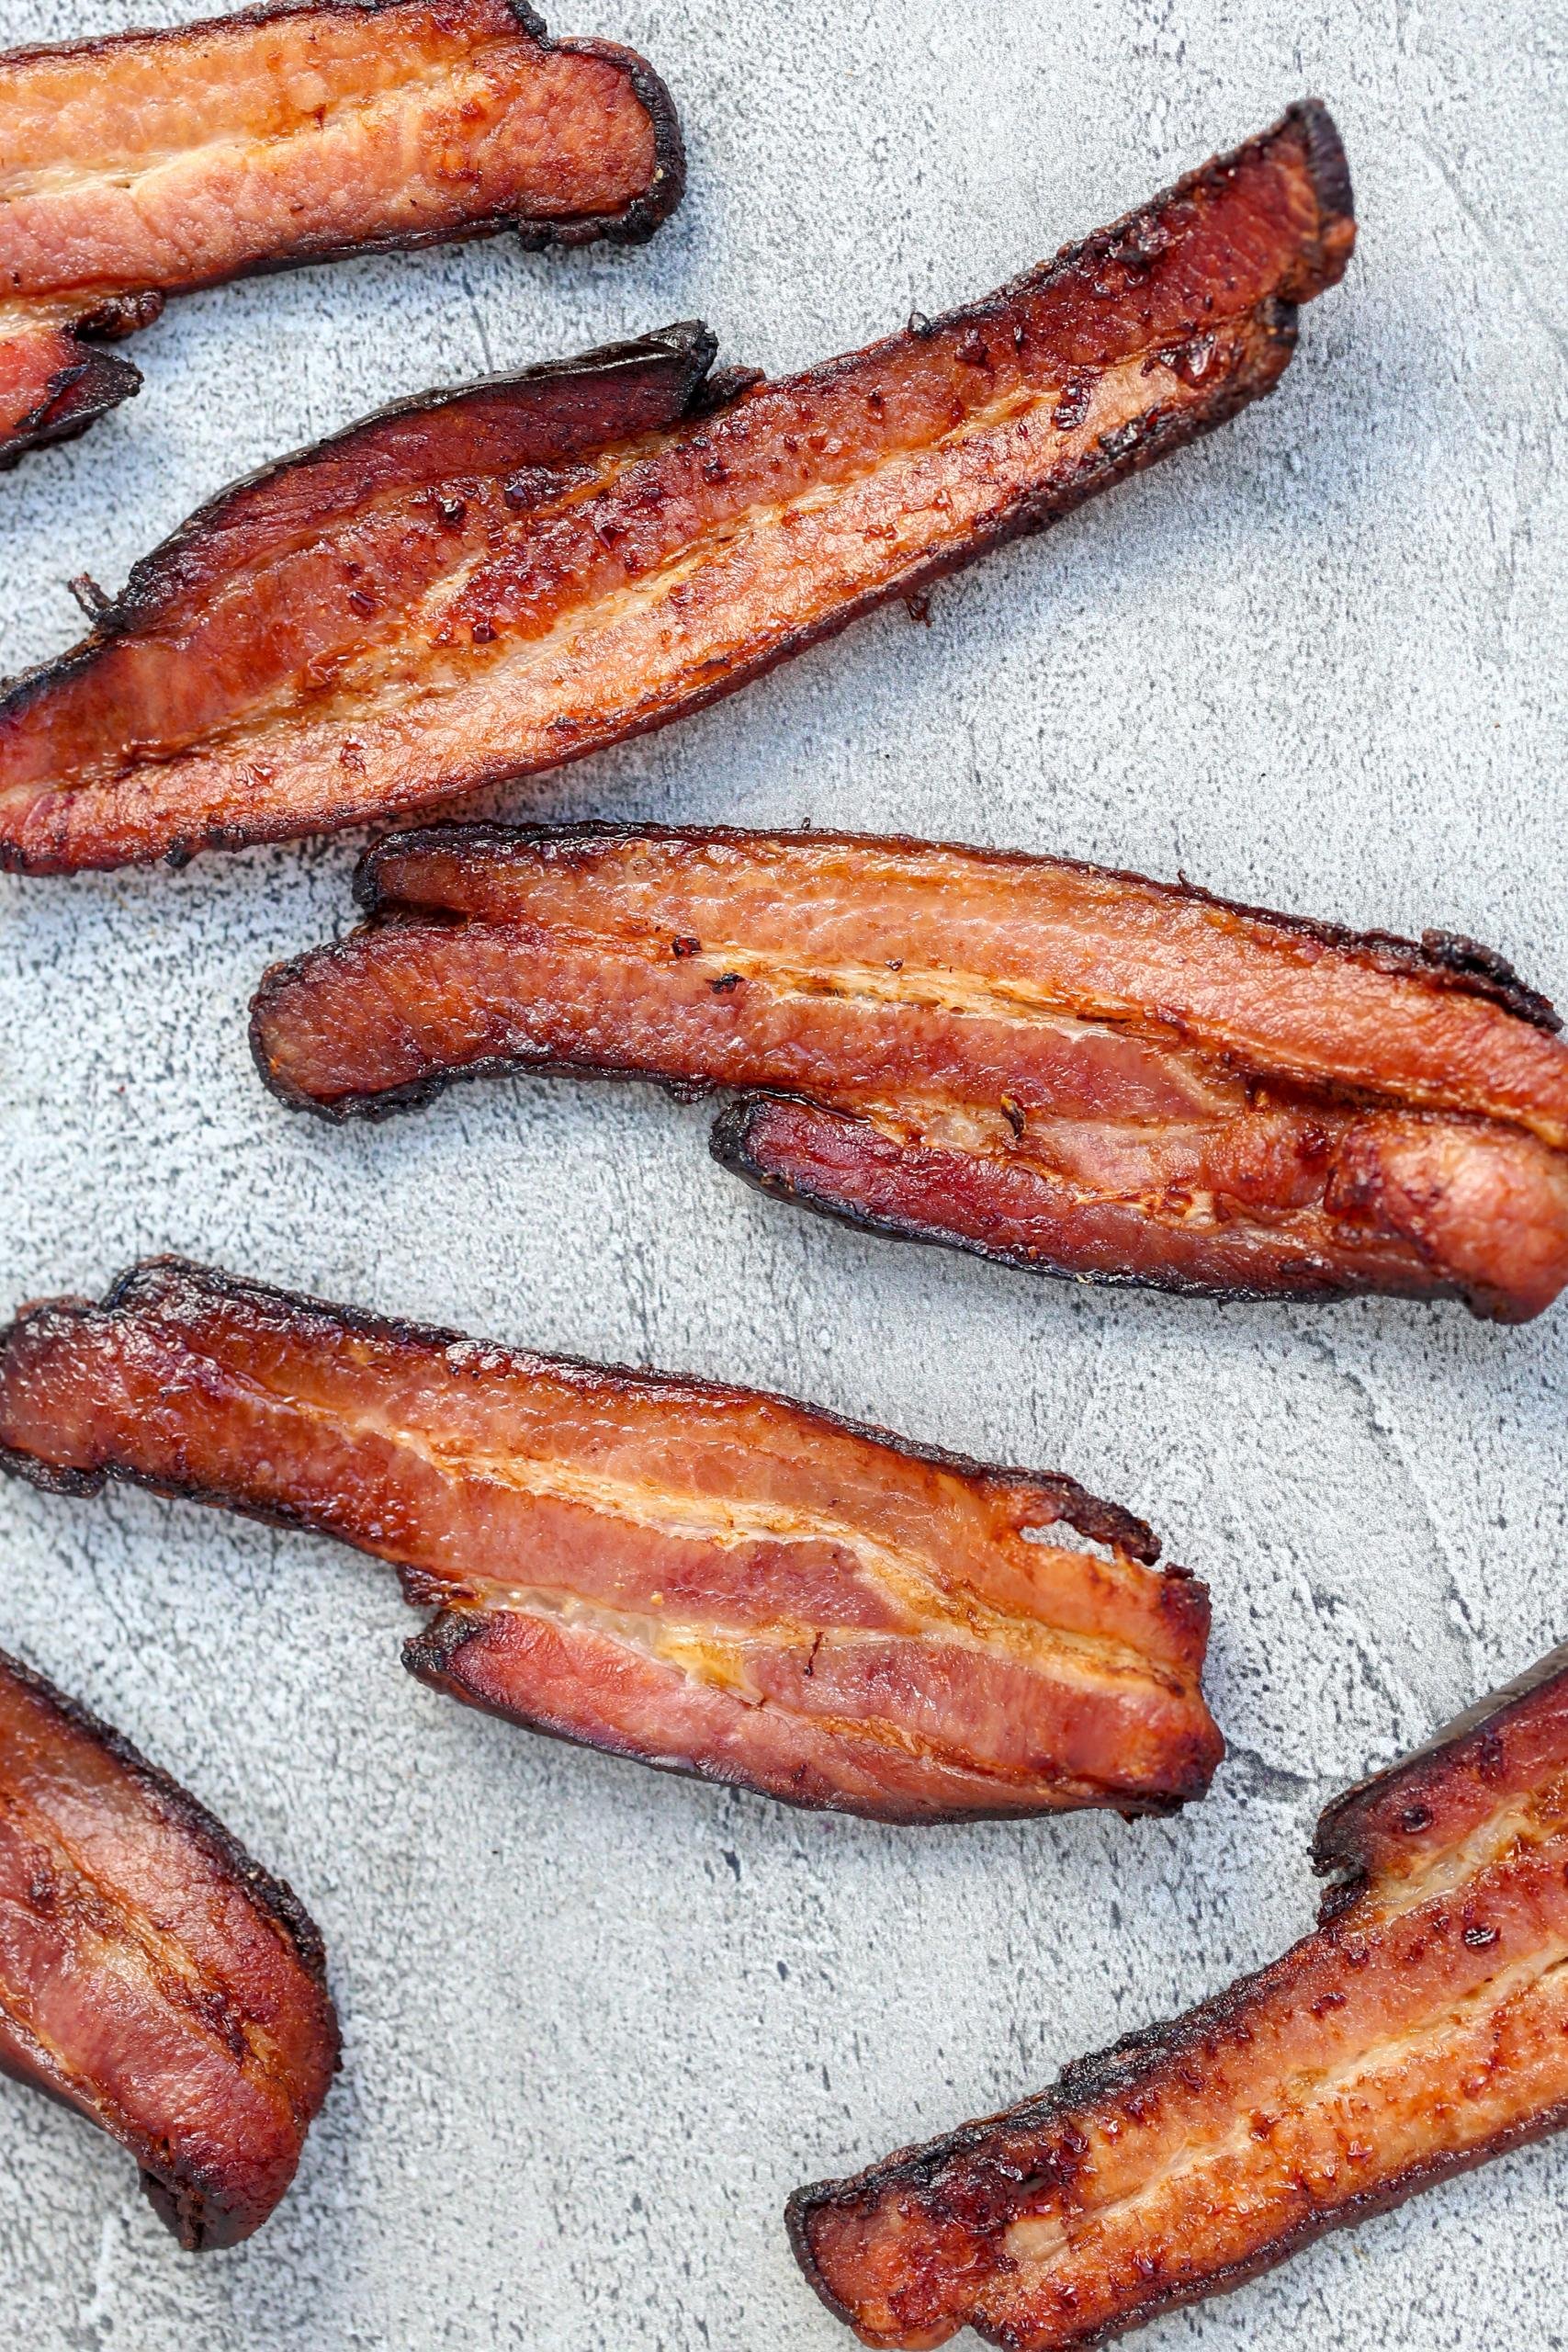 avatar bacon (free to use it)